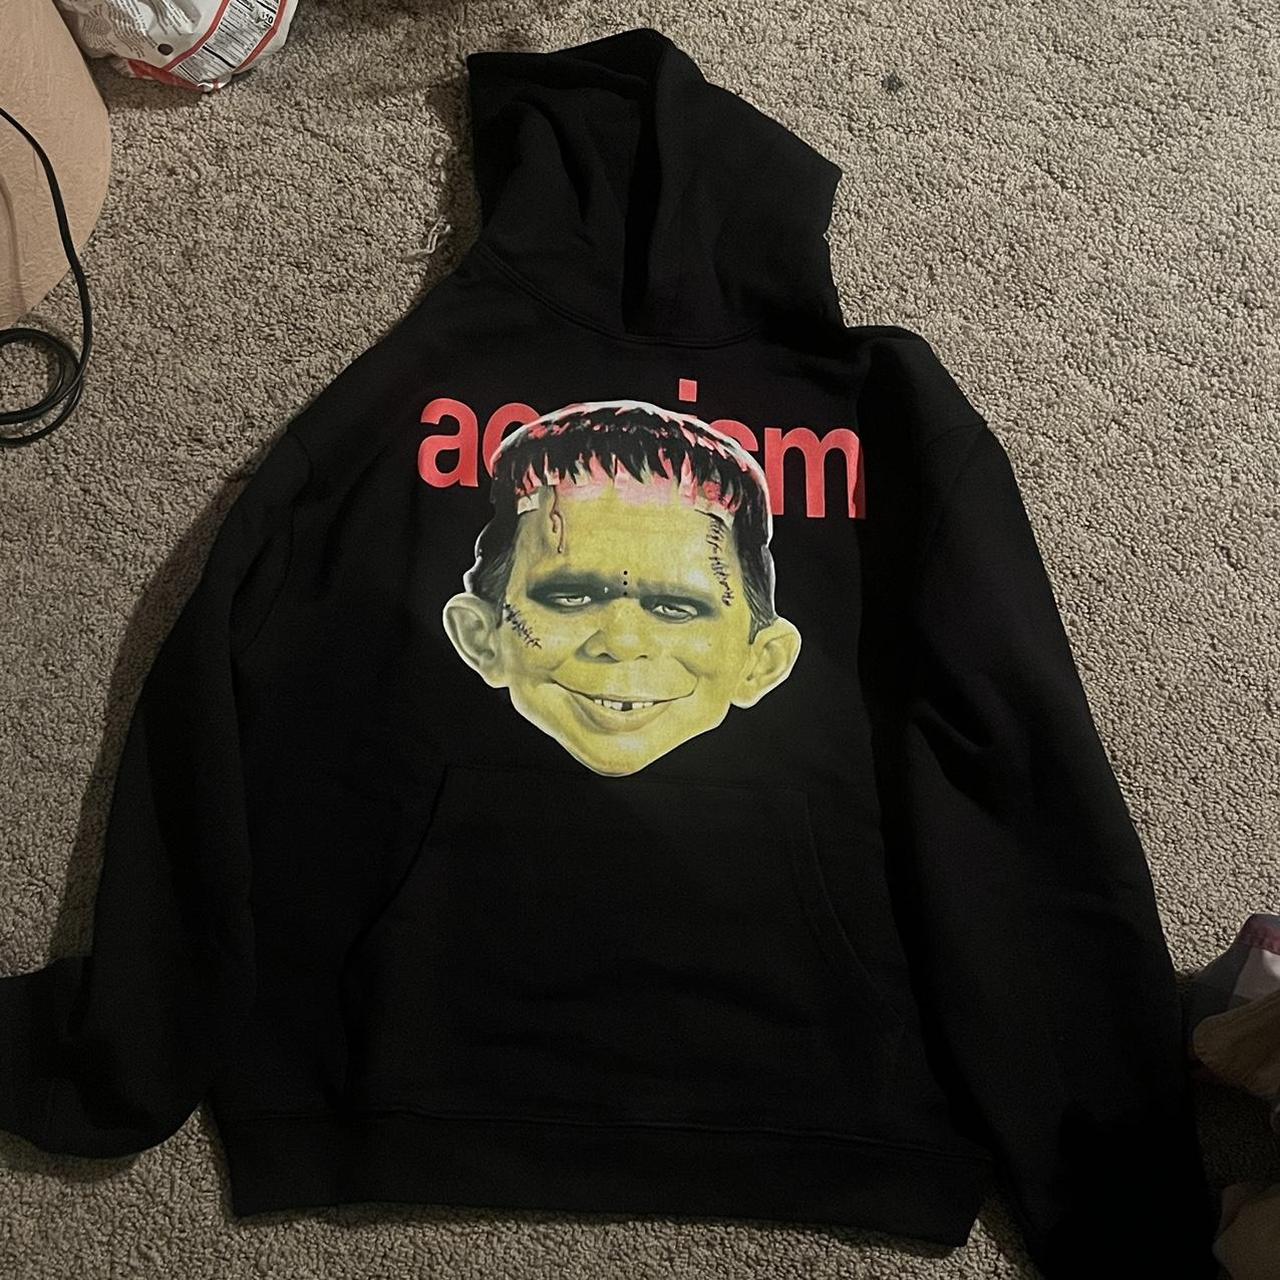 Aosuism Madd hoodie size small (fits oversized) - Depop